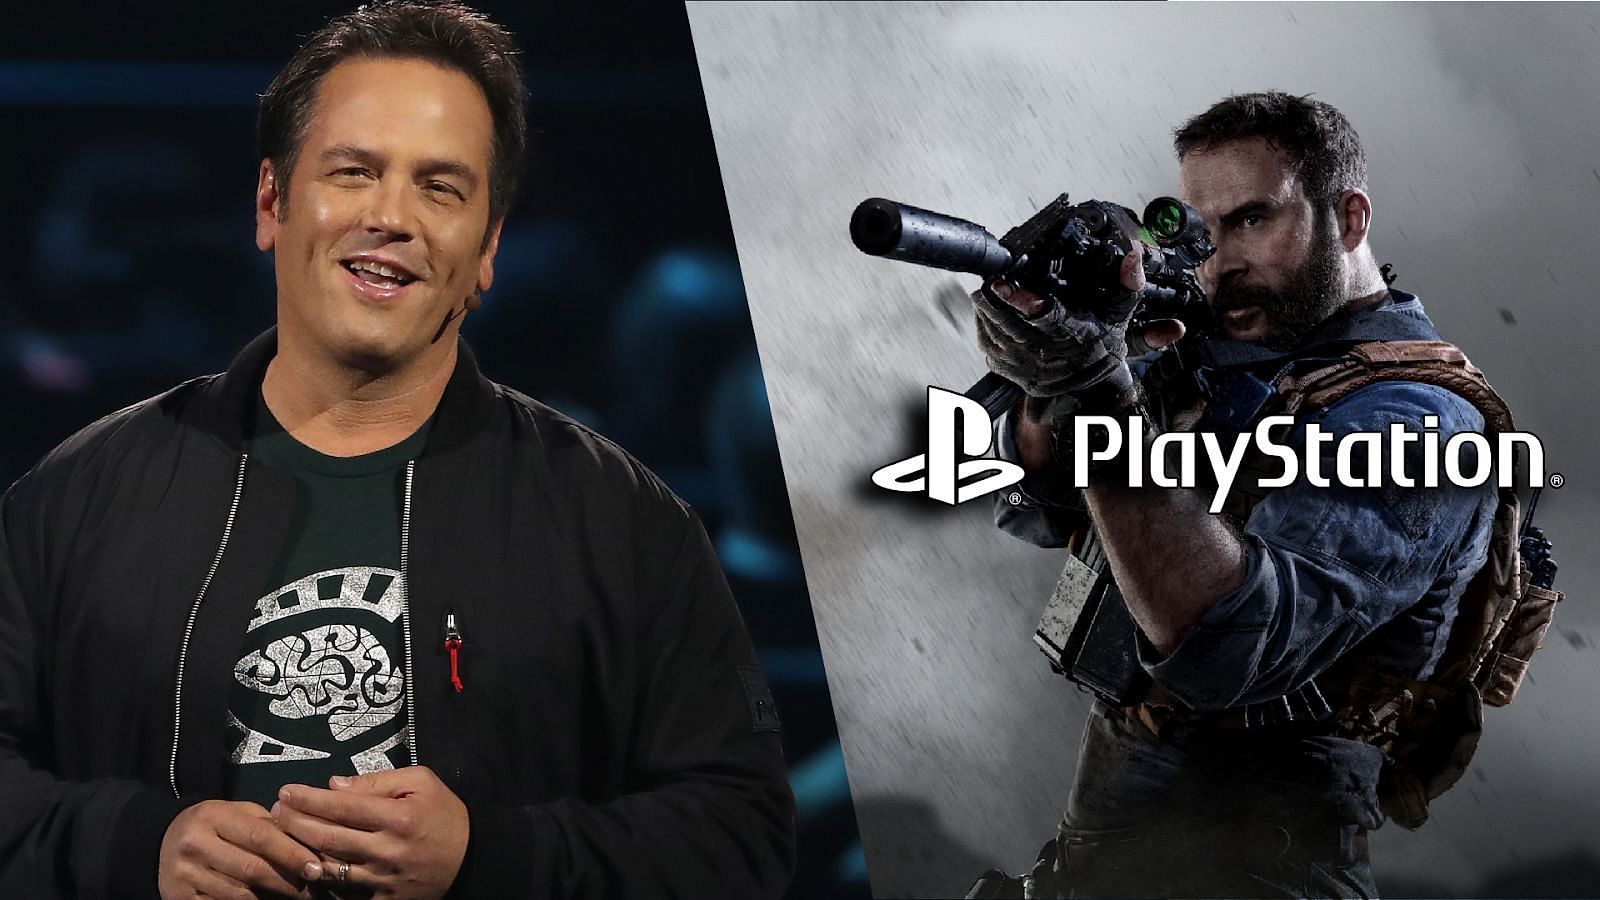 Phil Spencer addresses concerns of Call of Duty leaving PlayStation (Image by Sportskeeda)